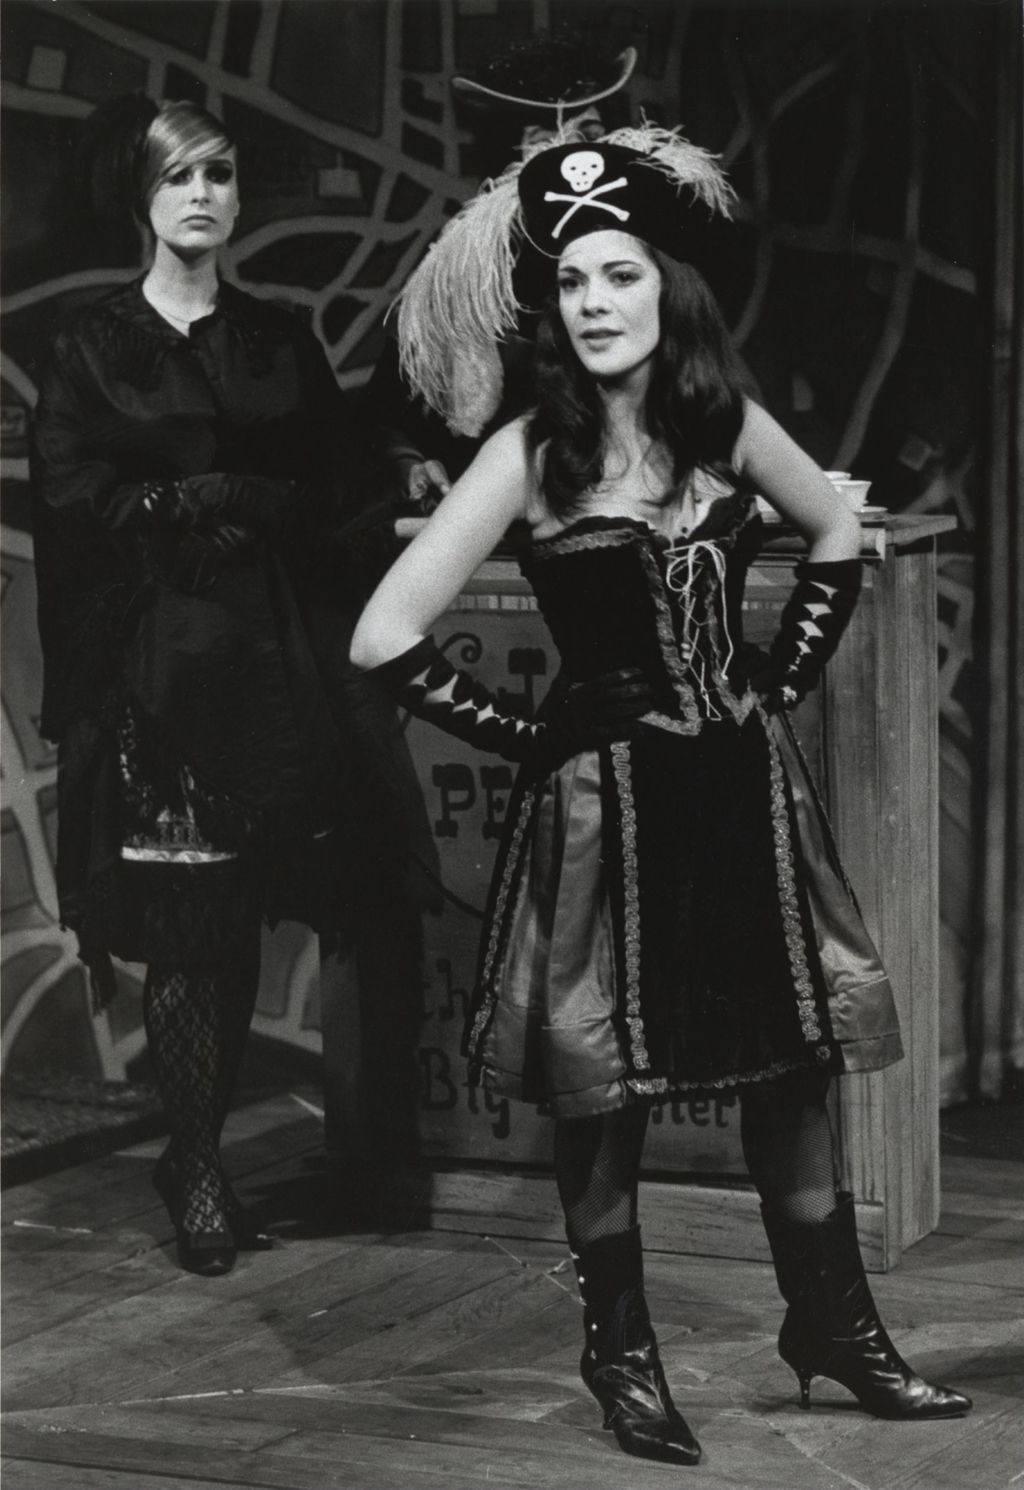 Patricia Kearney and Frances Cattell on stage in a production of "The Threepenny Opera" at Hull-House Theater